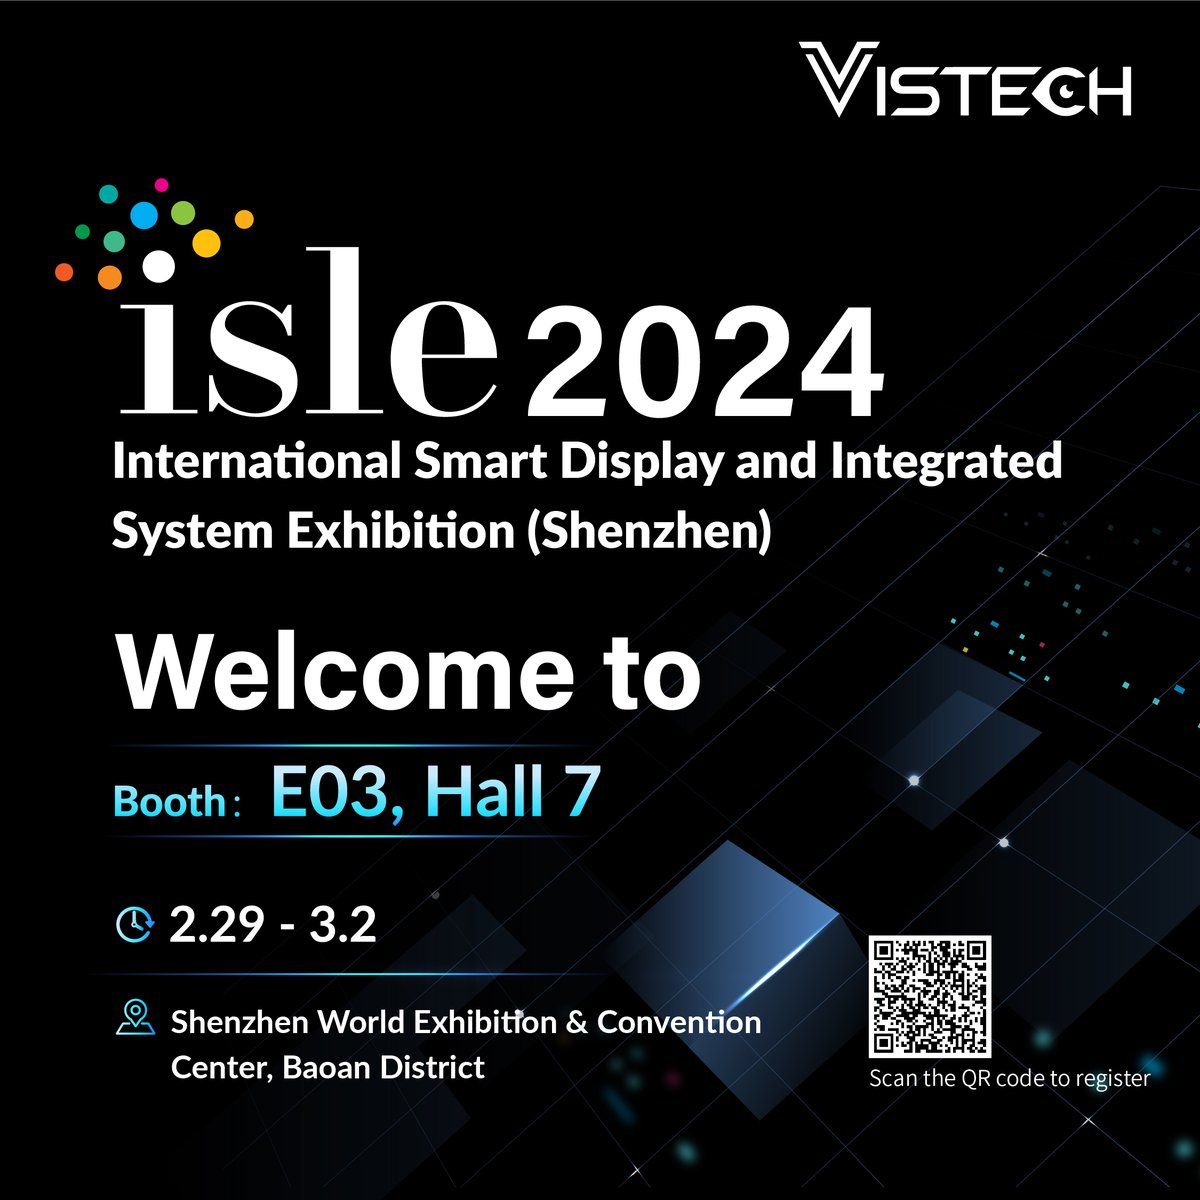 📢 Vistech is thrilled to announce that we will be exhibiting our cutting-edge #LEDdisplays and solutions at the upcoming #ISLE show in Shenzhen. Visit us and our partner, @RGBlink, at Booth Hall 7-E03 from February 29th to March 2nd for an unbelievable visual experience!